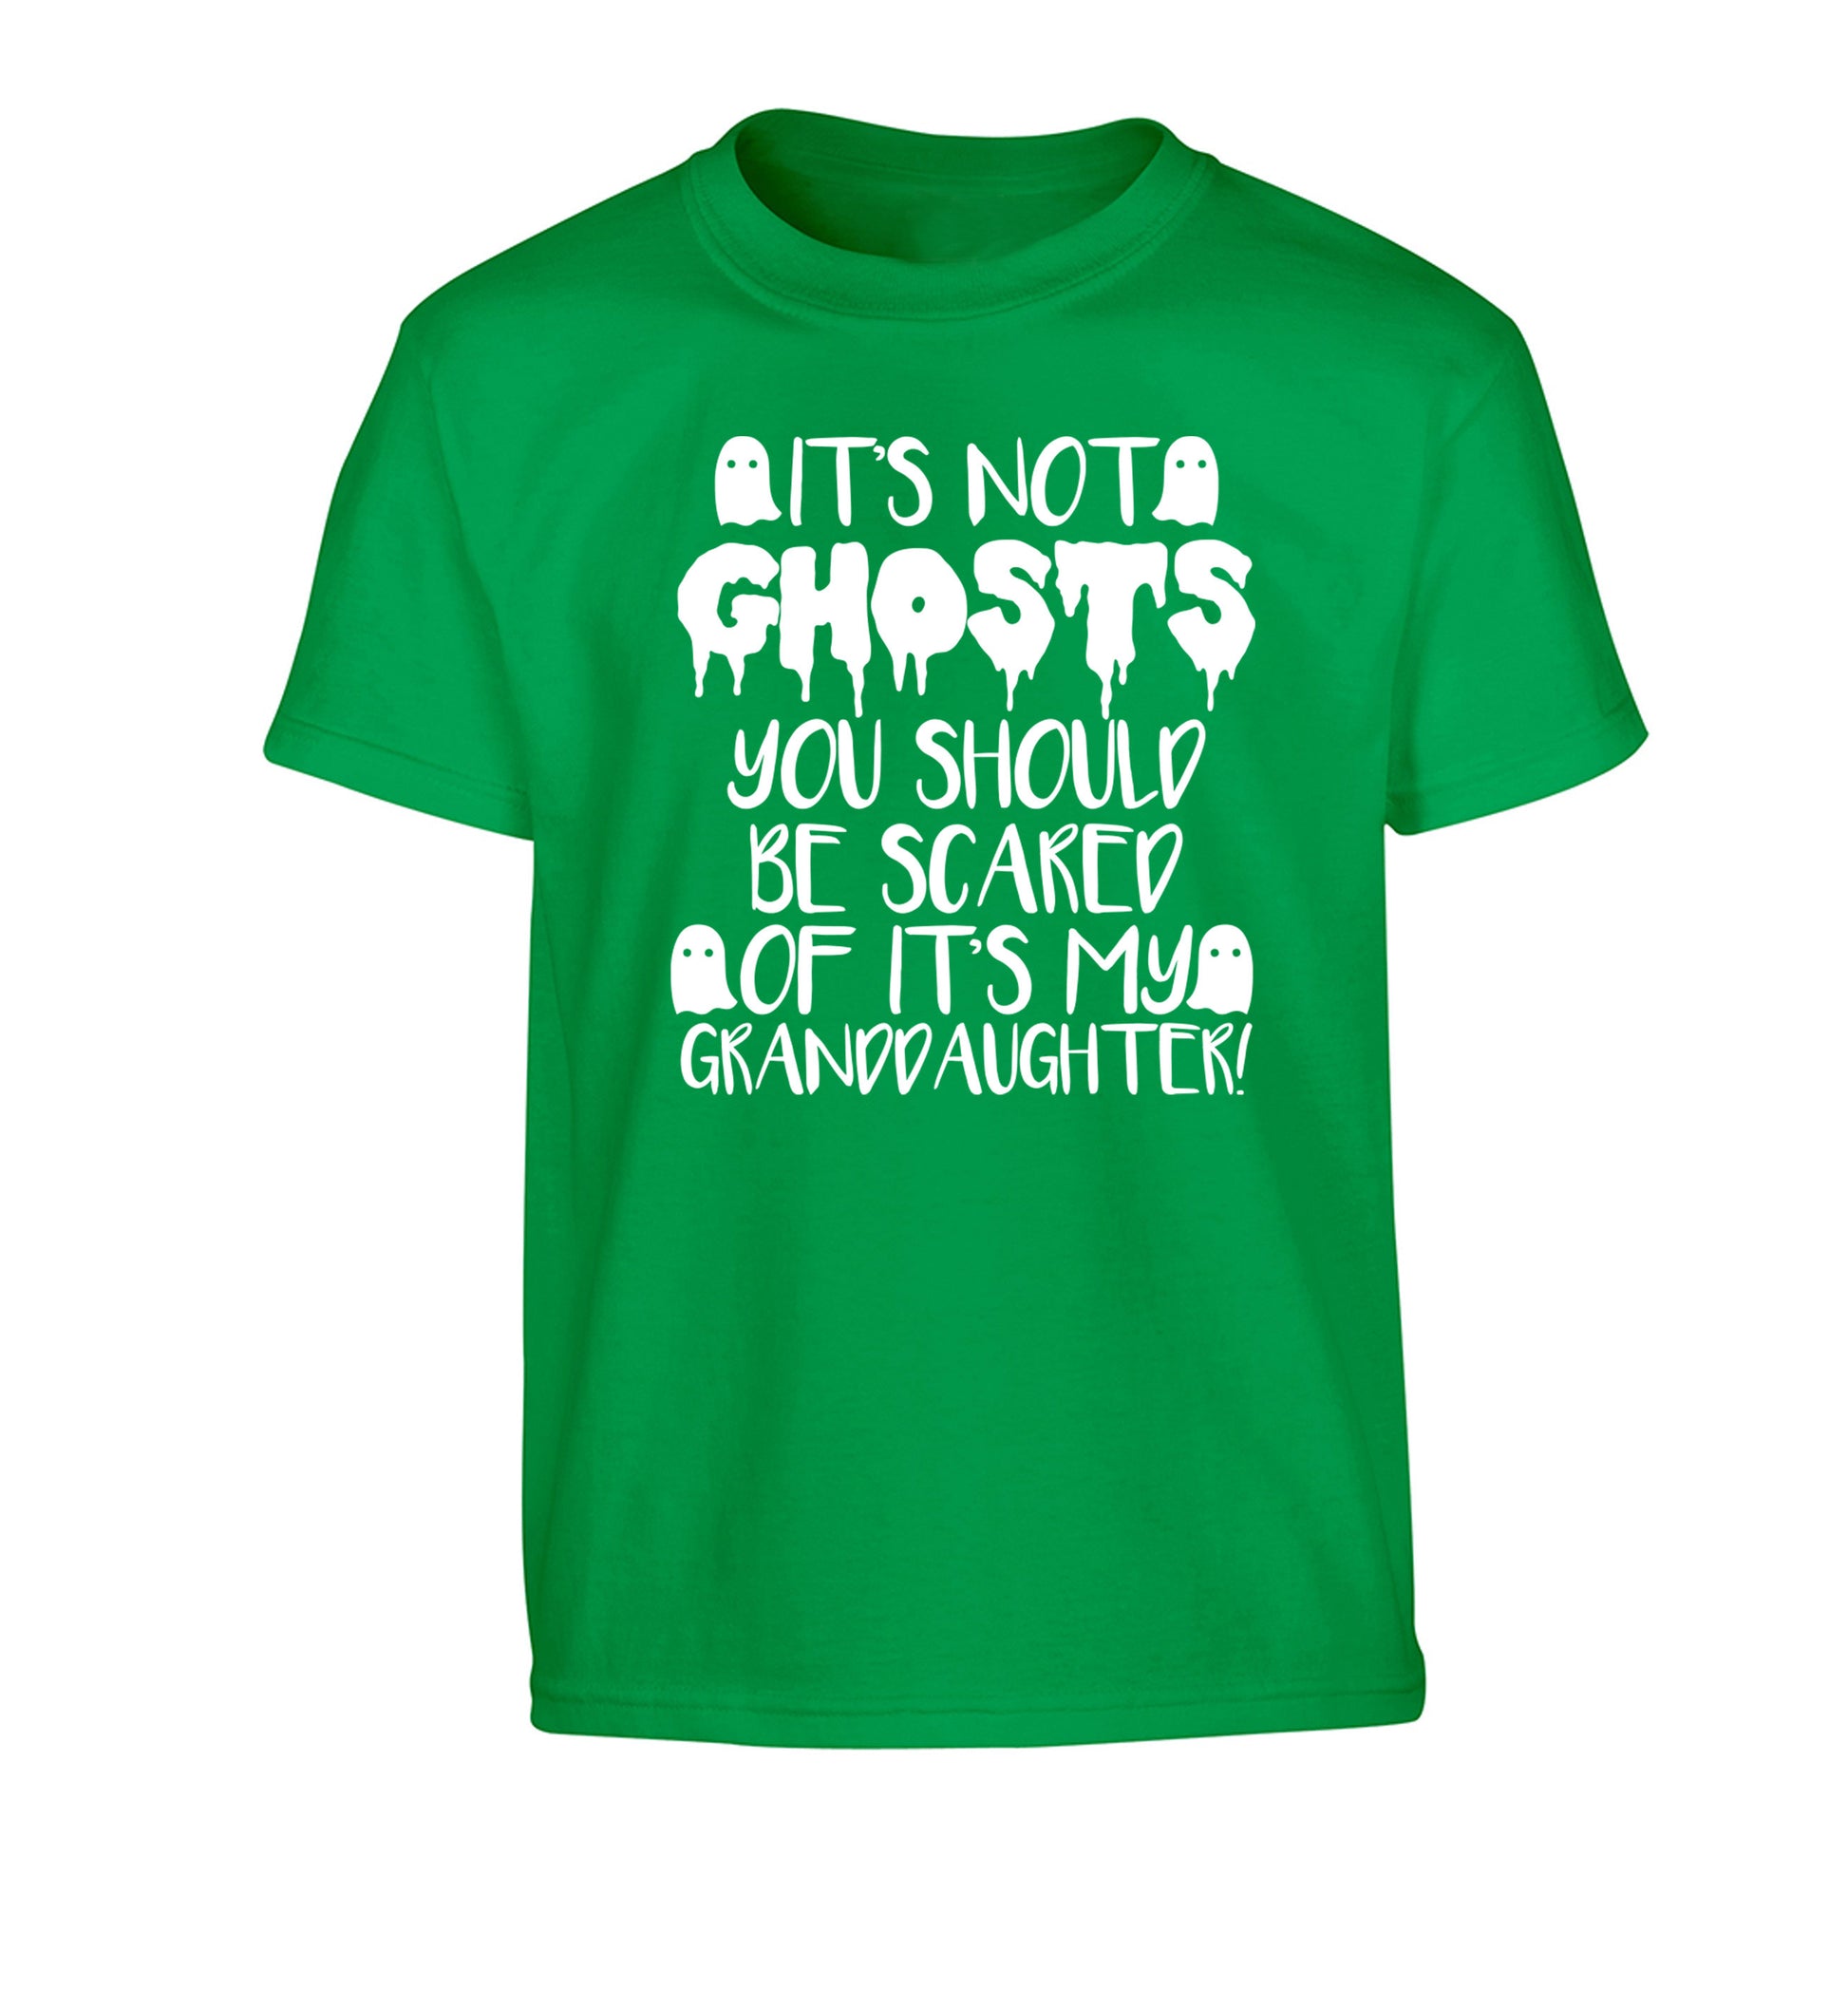 It's not ghosts you should be scared of it's my granddaughter! Children's green Tshirt 12-14 Years